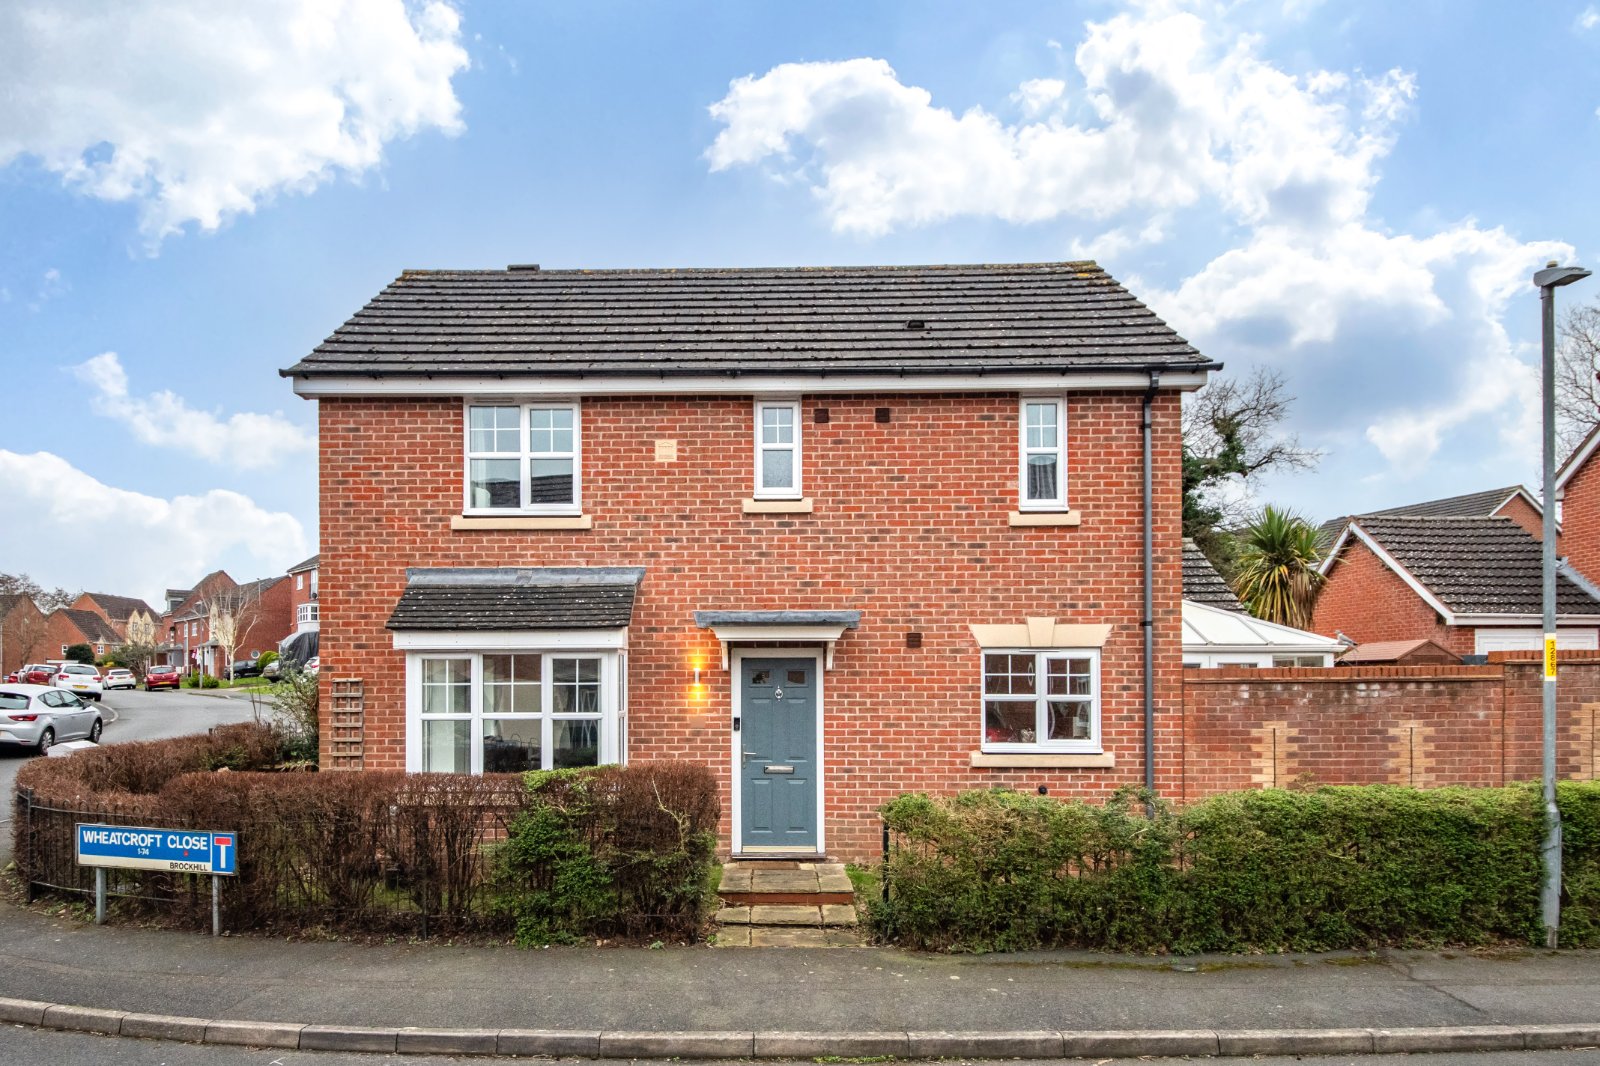 3 bed house for sale in Wheatcroft Close, Redditch 1